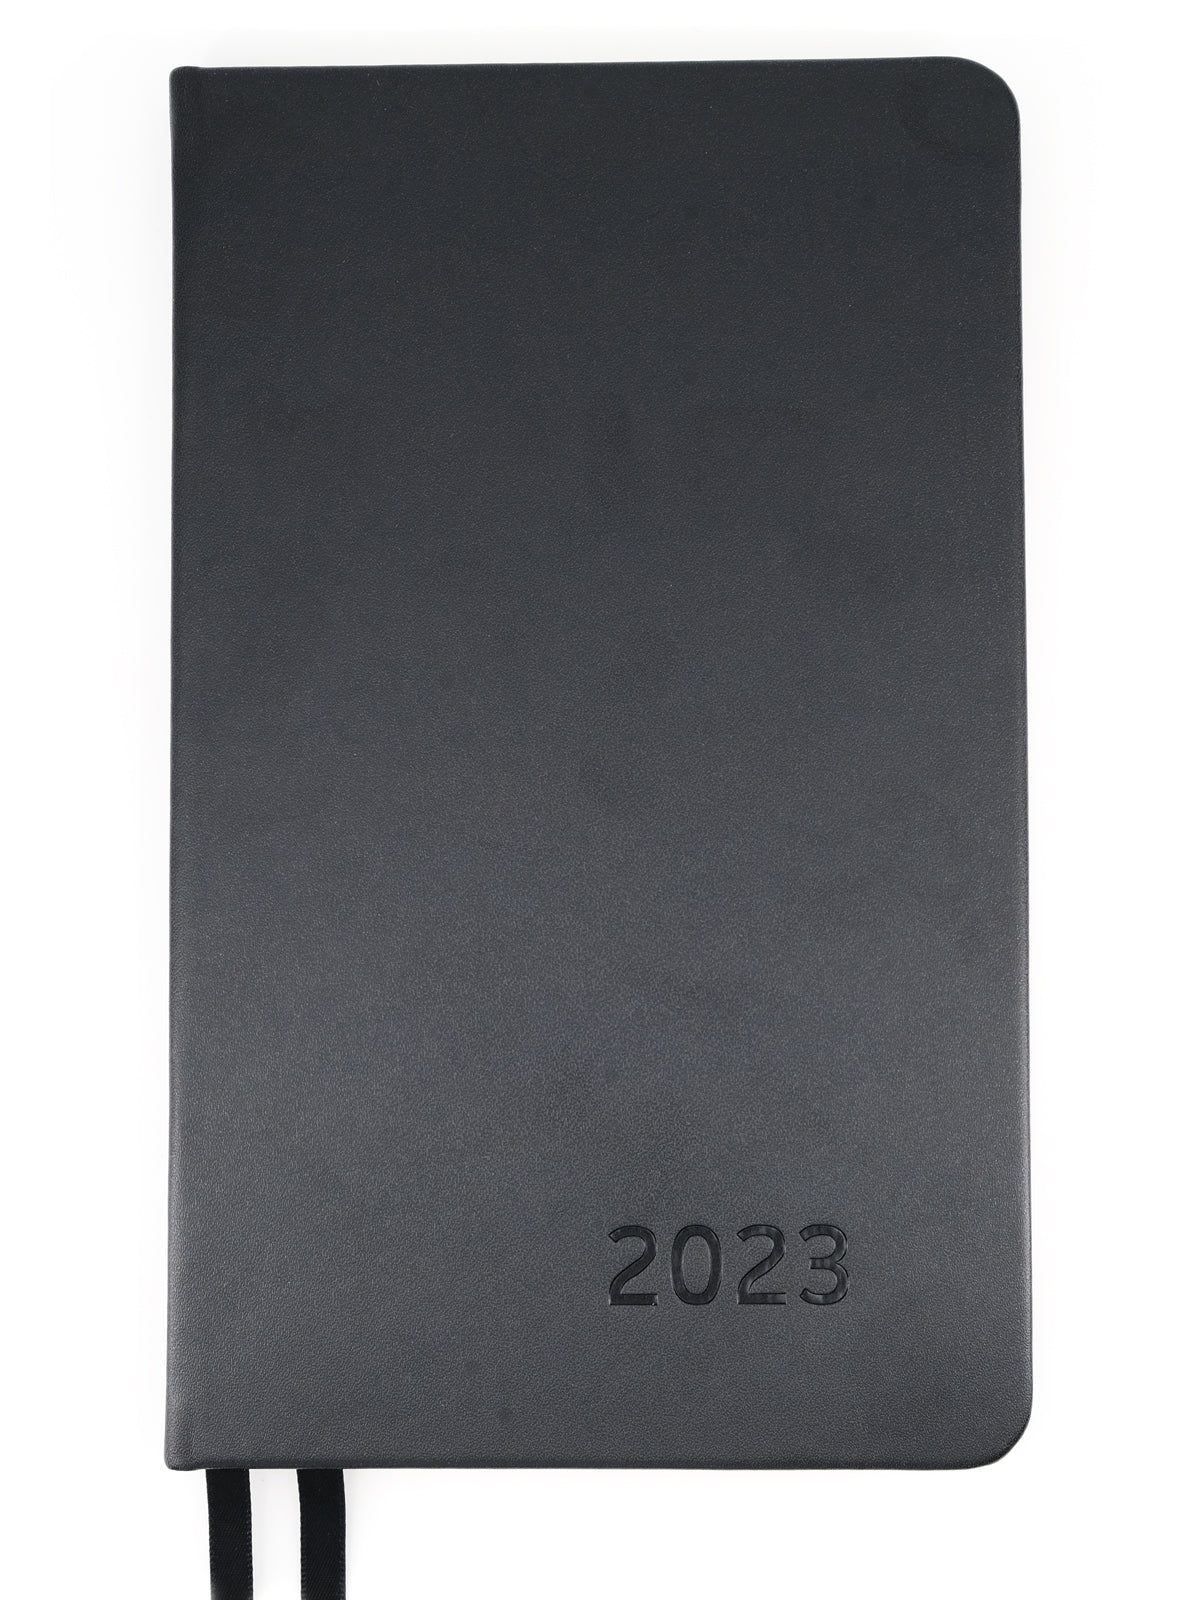 2023 Planner - Yearly, Weekly, Monthly, Daily Planner 2023-2024 with Calendar 2023-2024 Planner Organizer (Black)